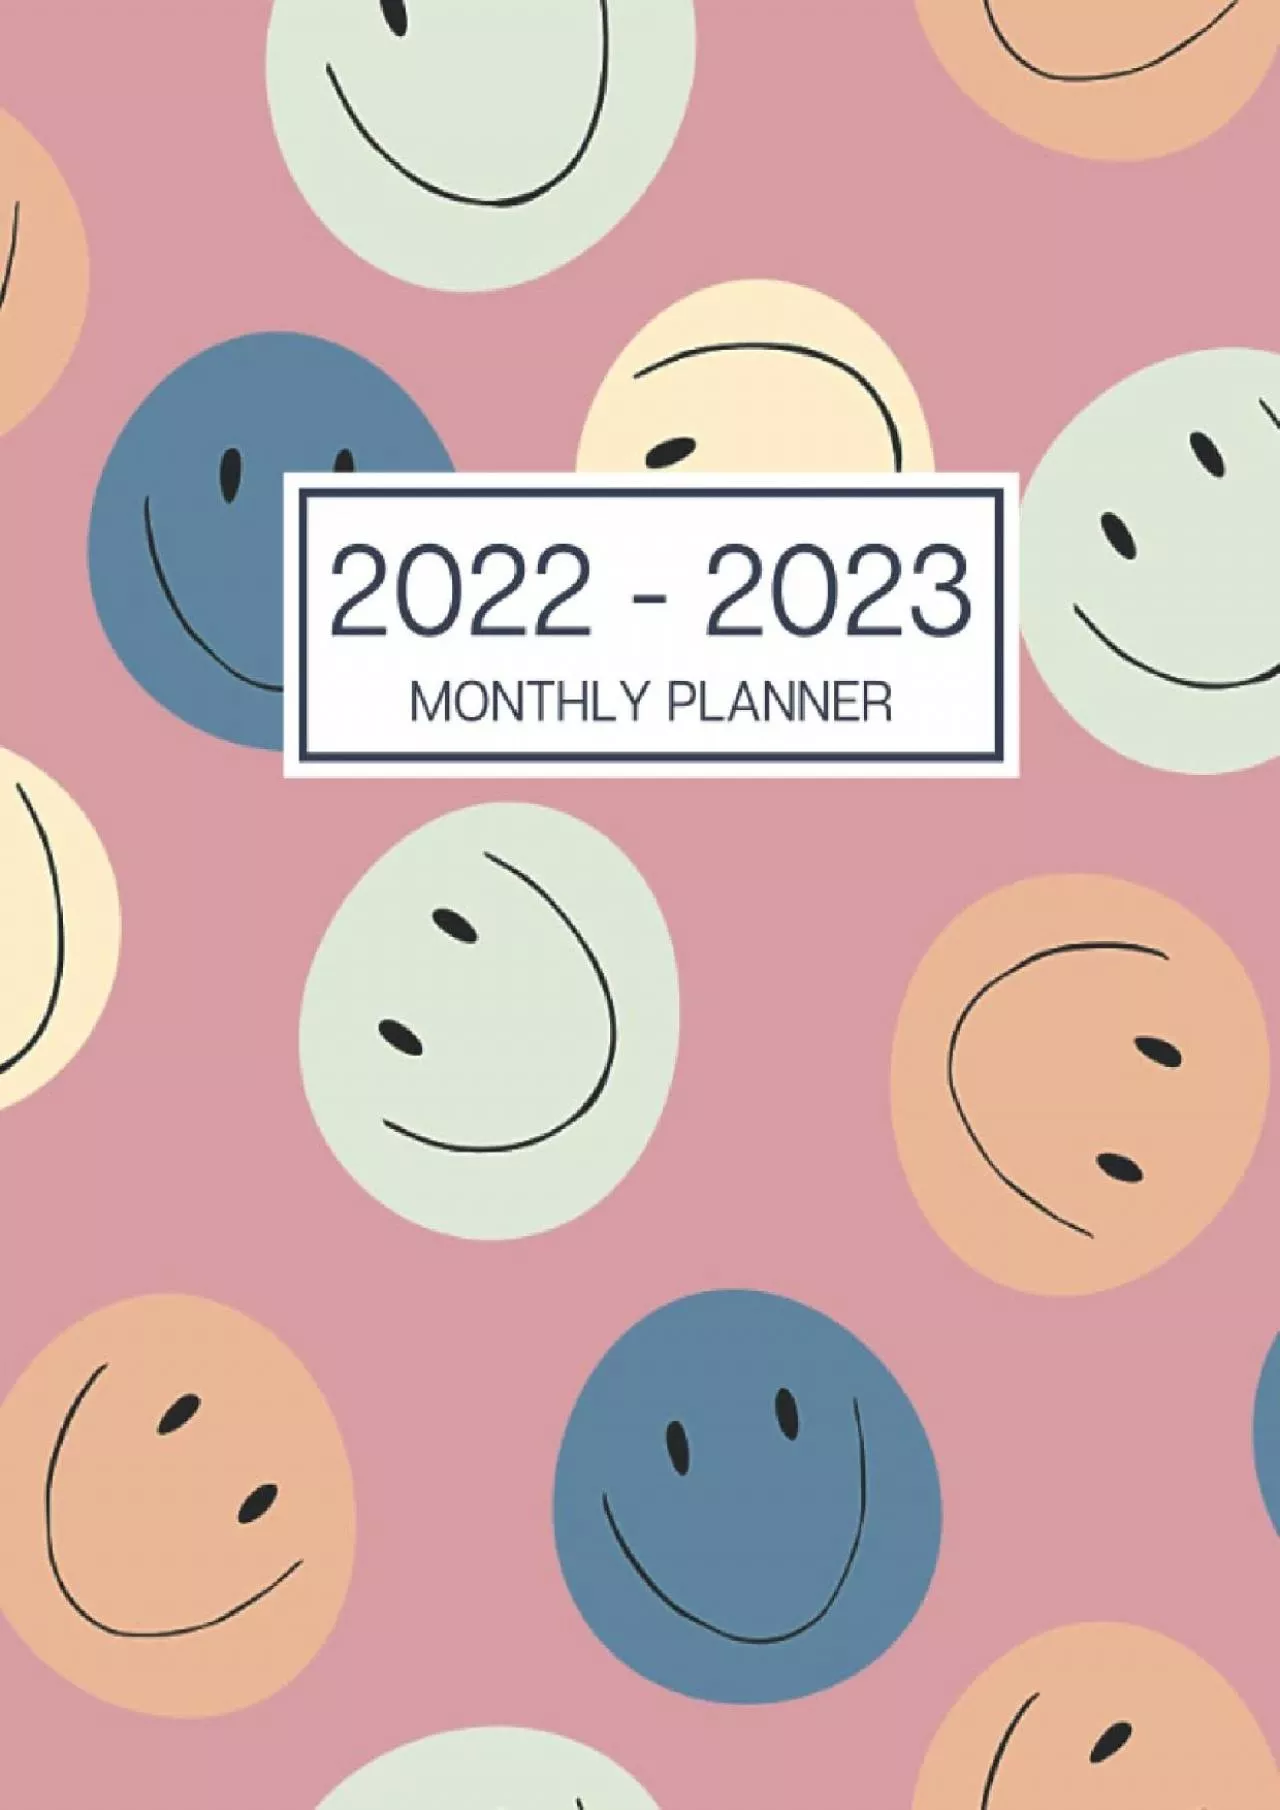 [BEST]-2022-2023 Monthly Planner: Large 2 Year Calendar Planner. Yearly At A Glance Organizer